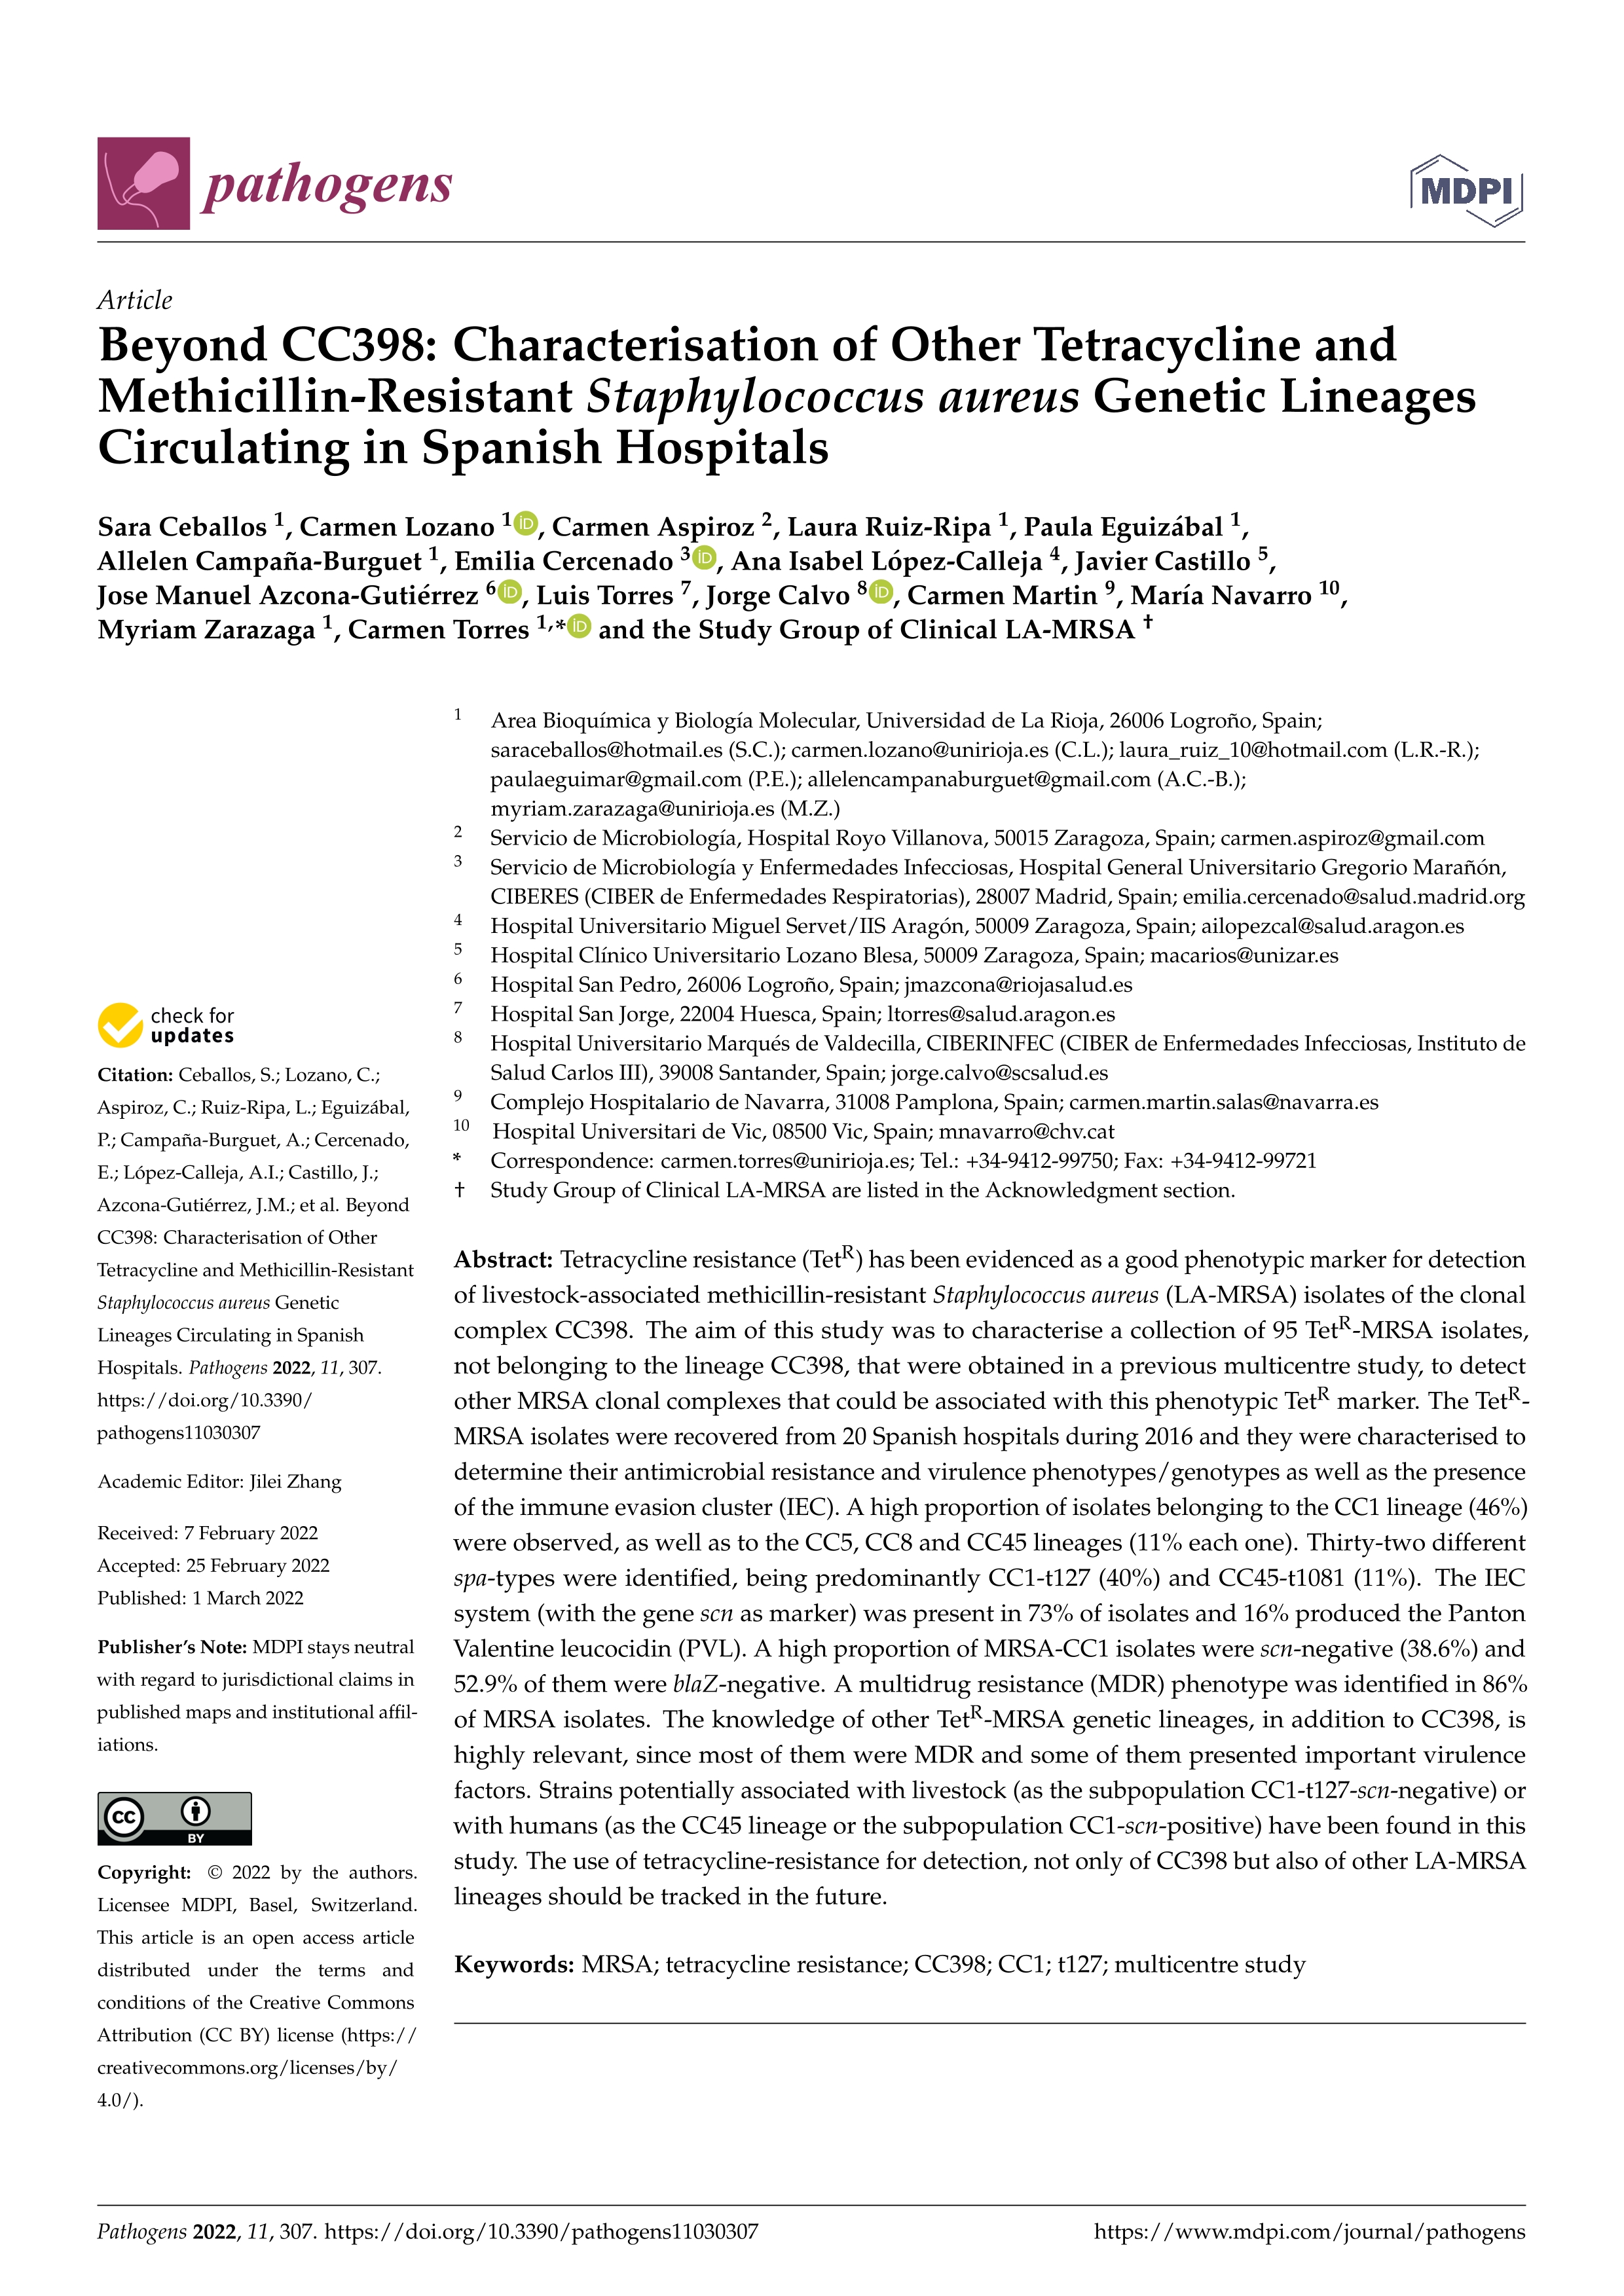 Beyond CC398: Characterisation of Other Tetracycline and Methicillin-Resistant Staphylococcus aureus Genetic Lineages Circulating in Spanish Hospitals